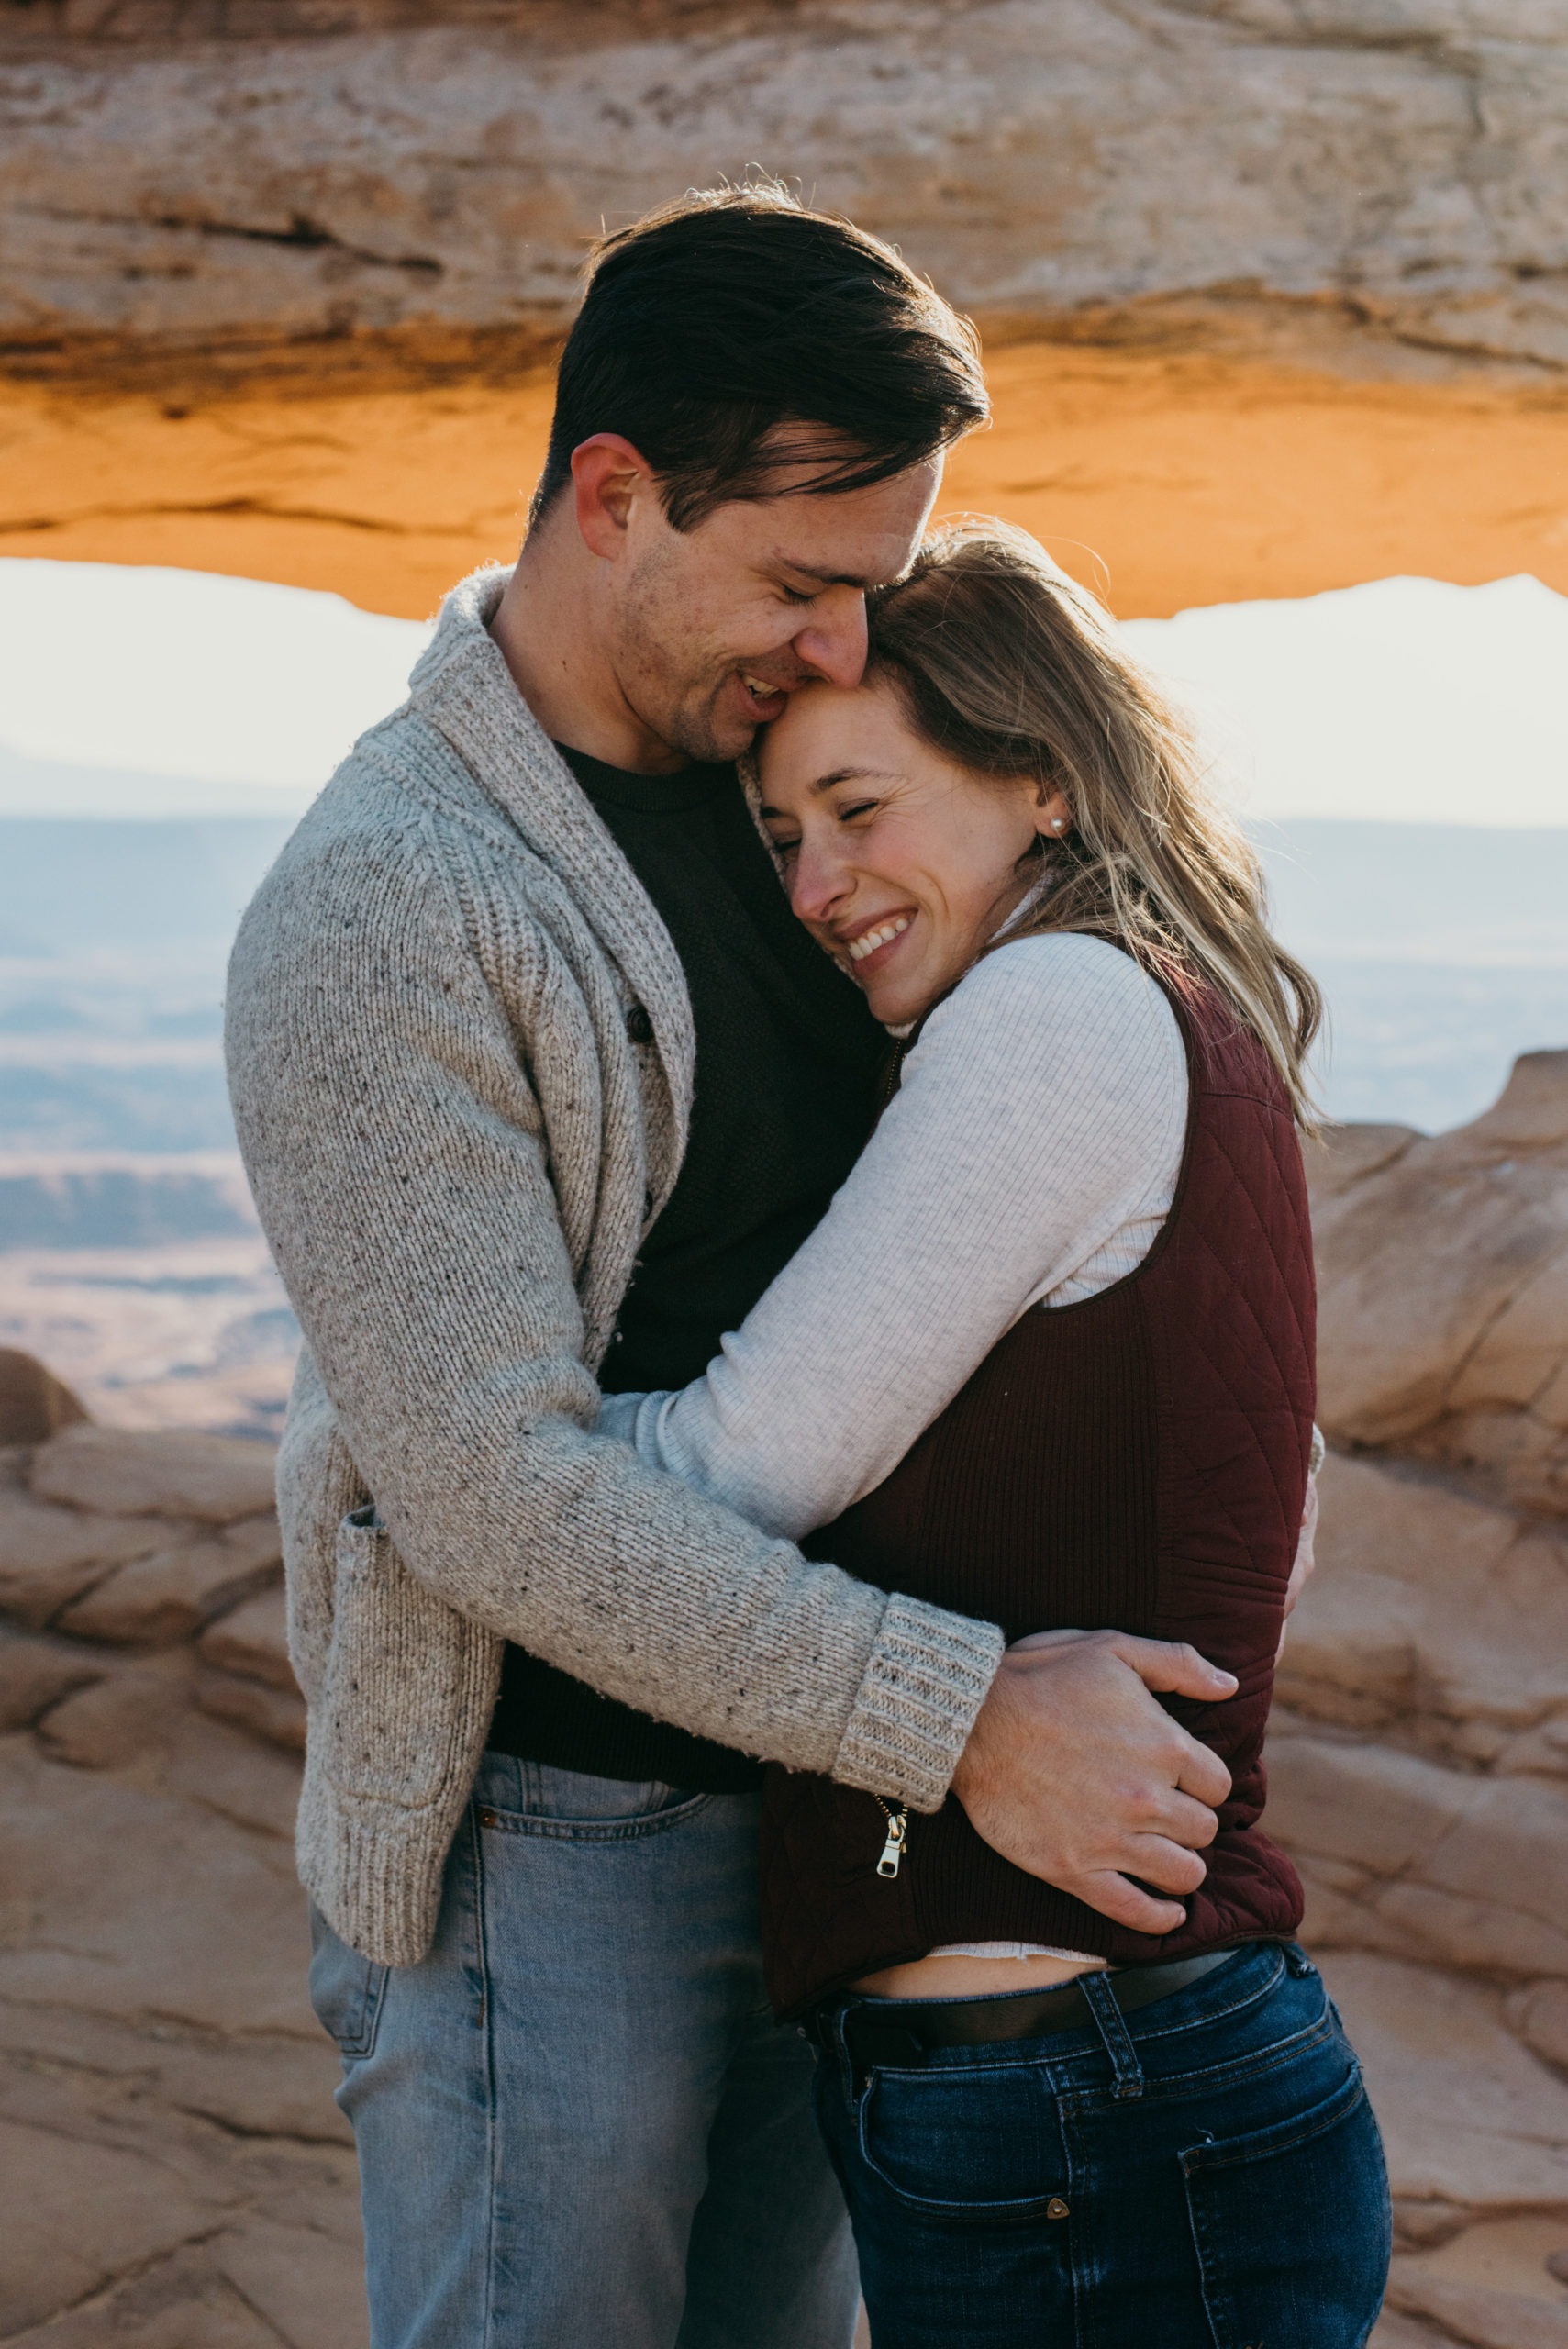 A couple sharing a tender embrace in a rocky landscape with a natural arch in the background, both smiling and enjoying the moment.